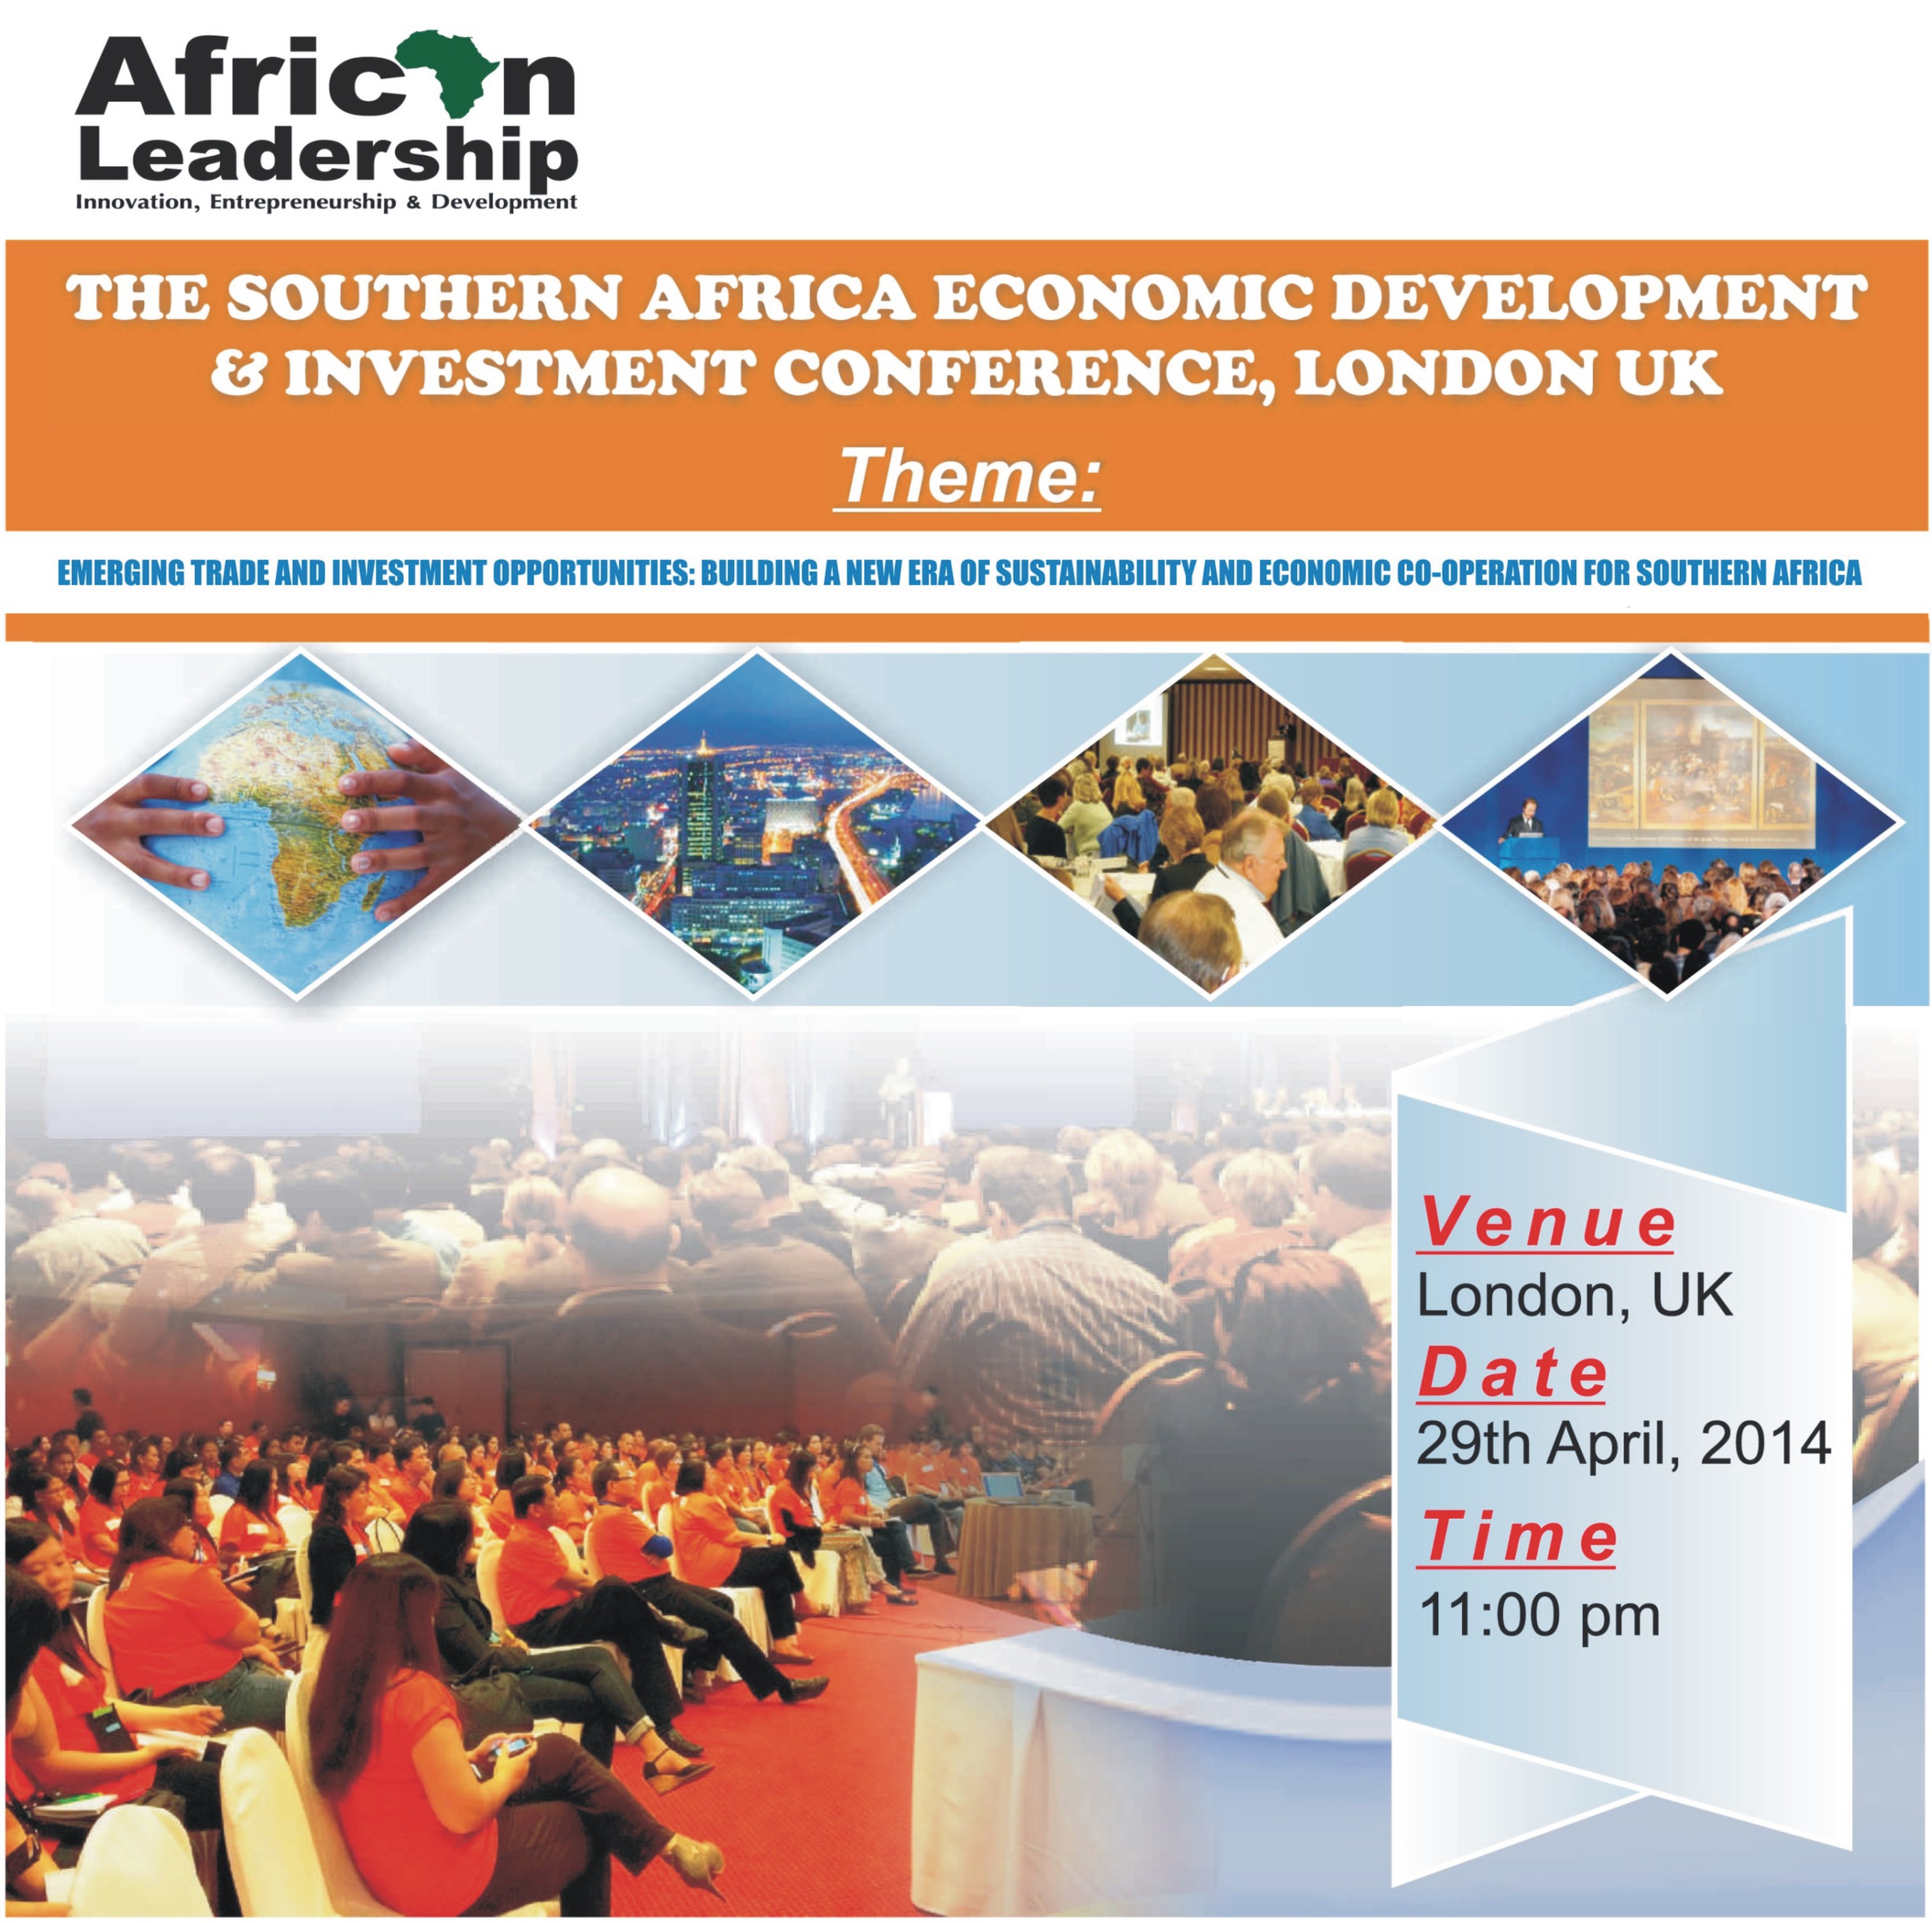 Southern Africa Economic Development & Investment Conference, London